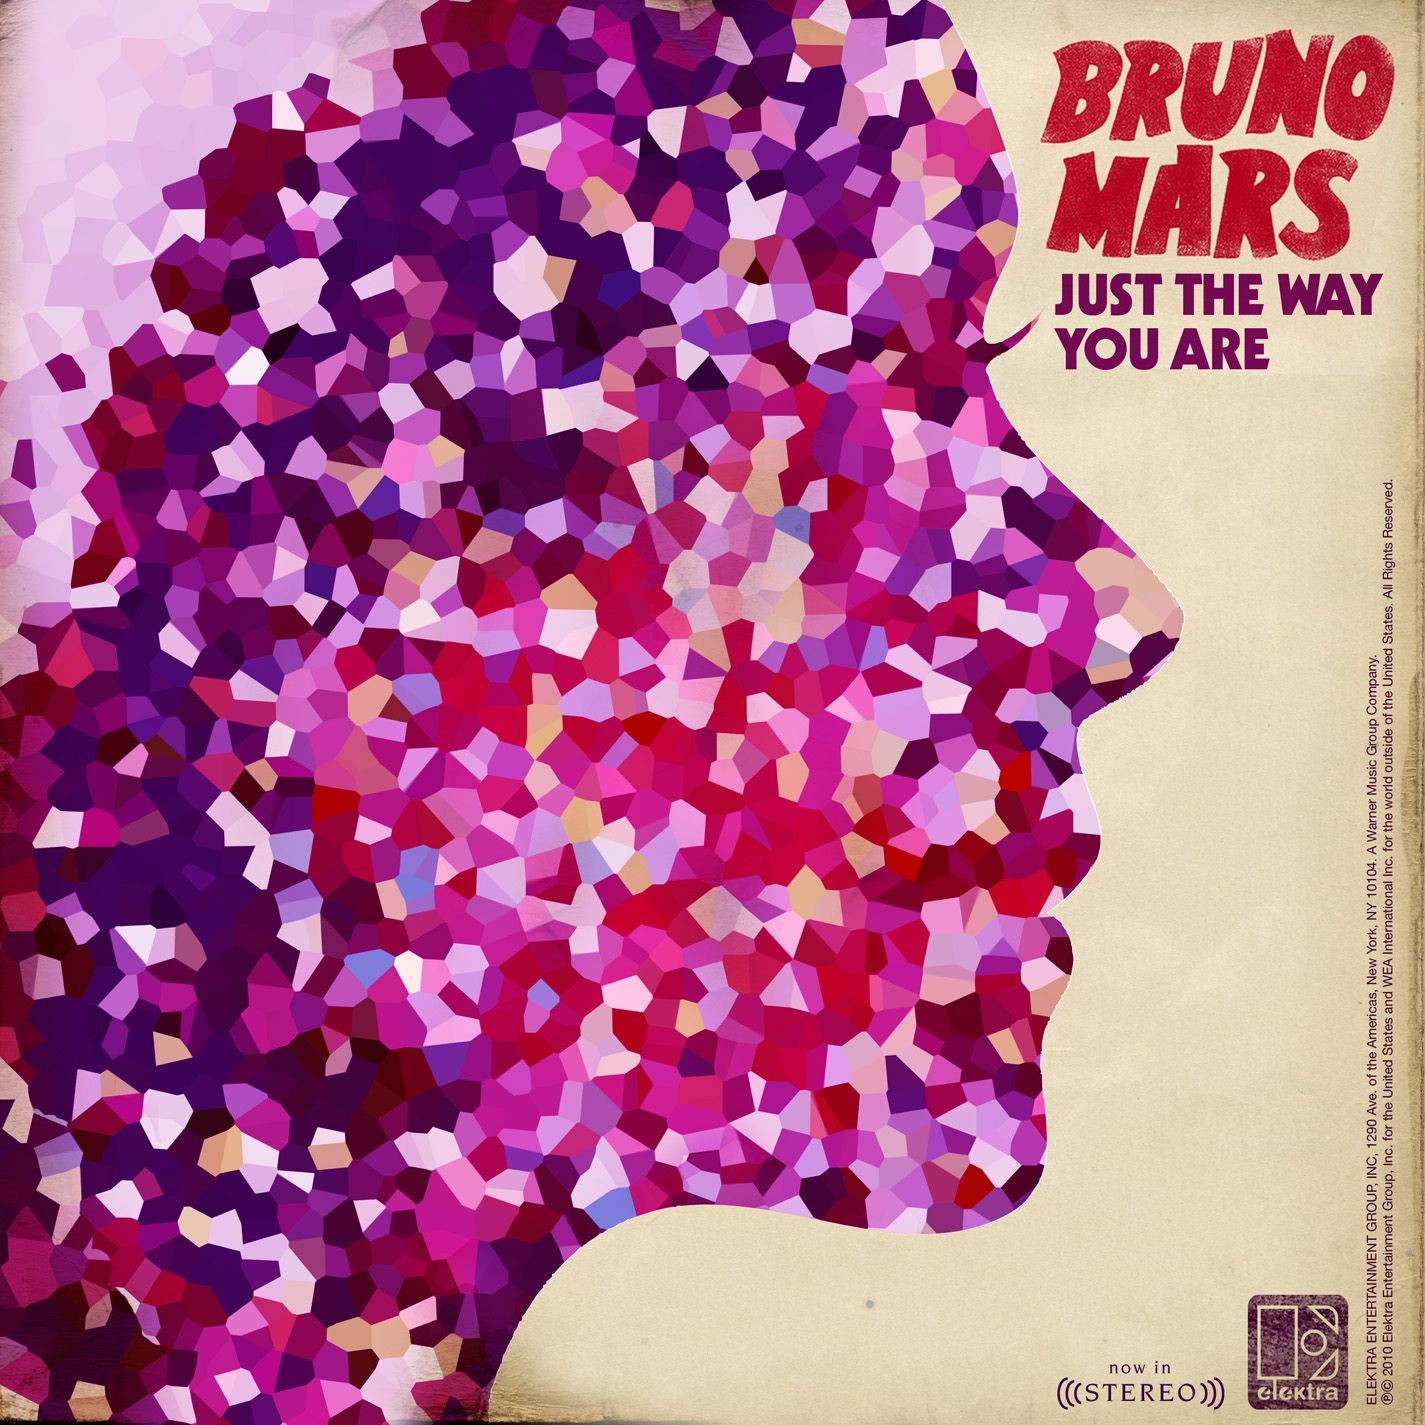 Bruno mars just the way you are lyrics n chords